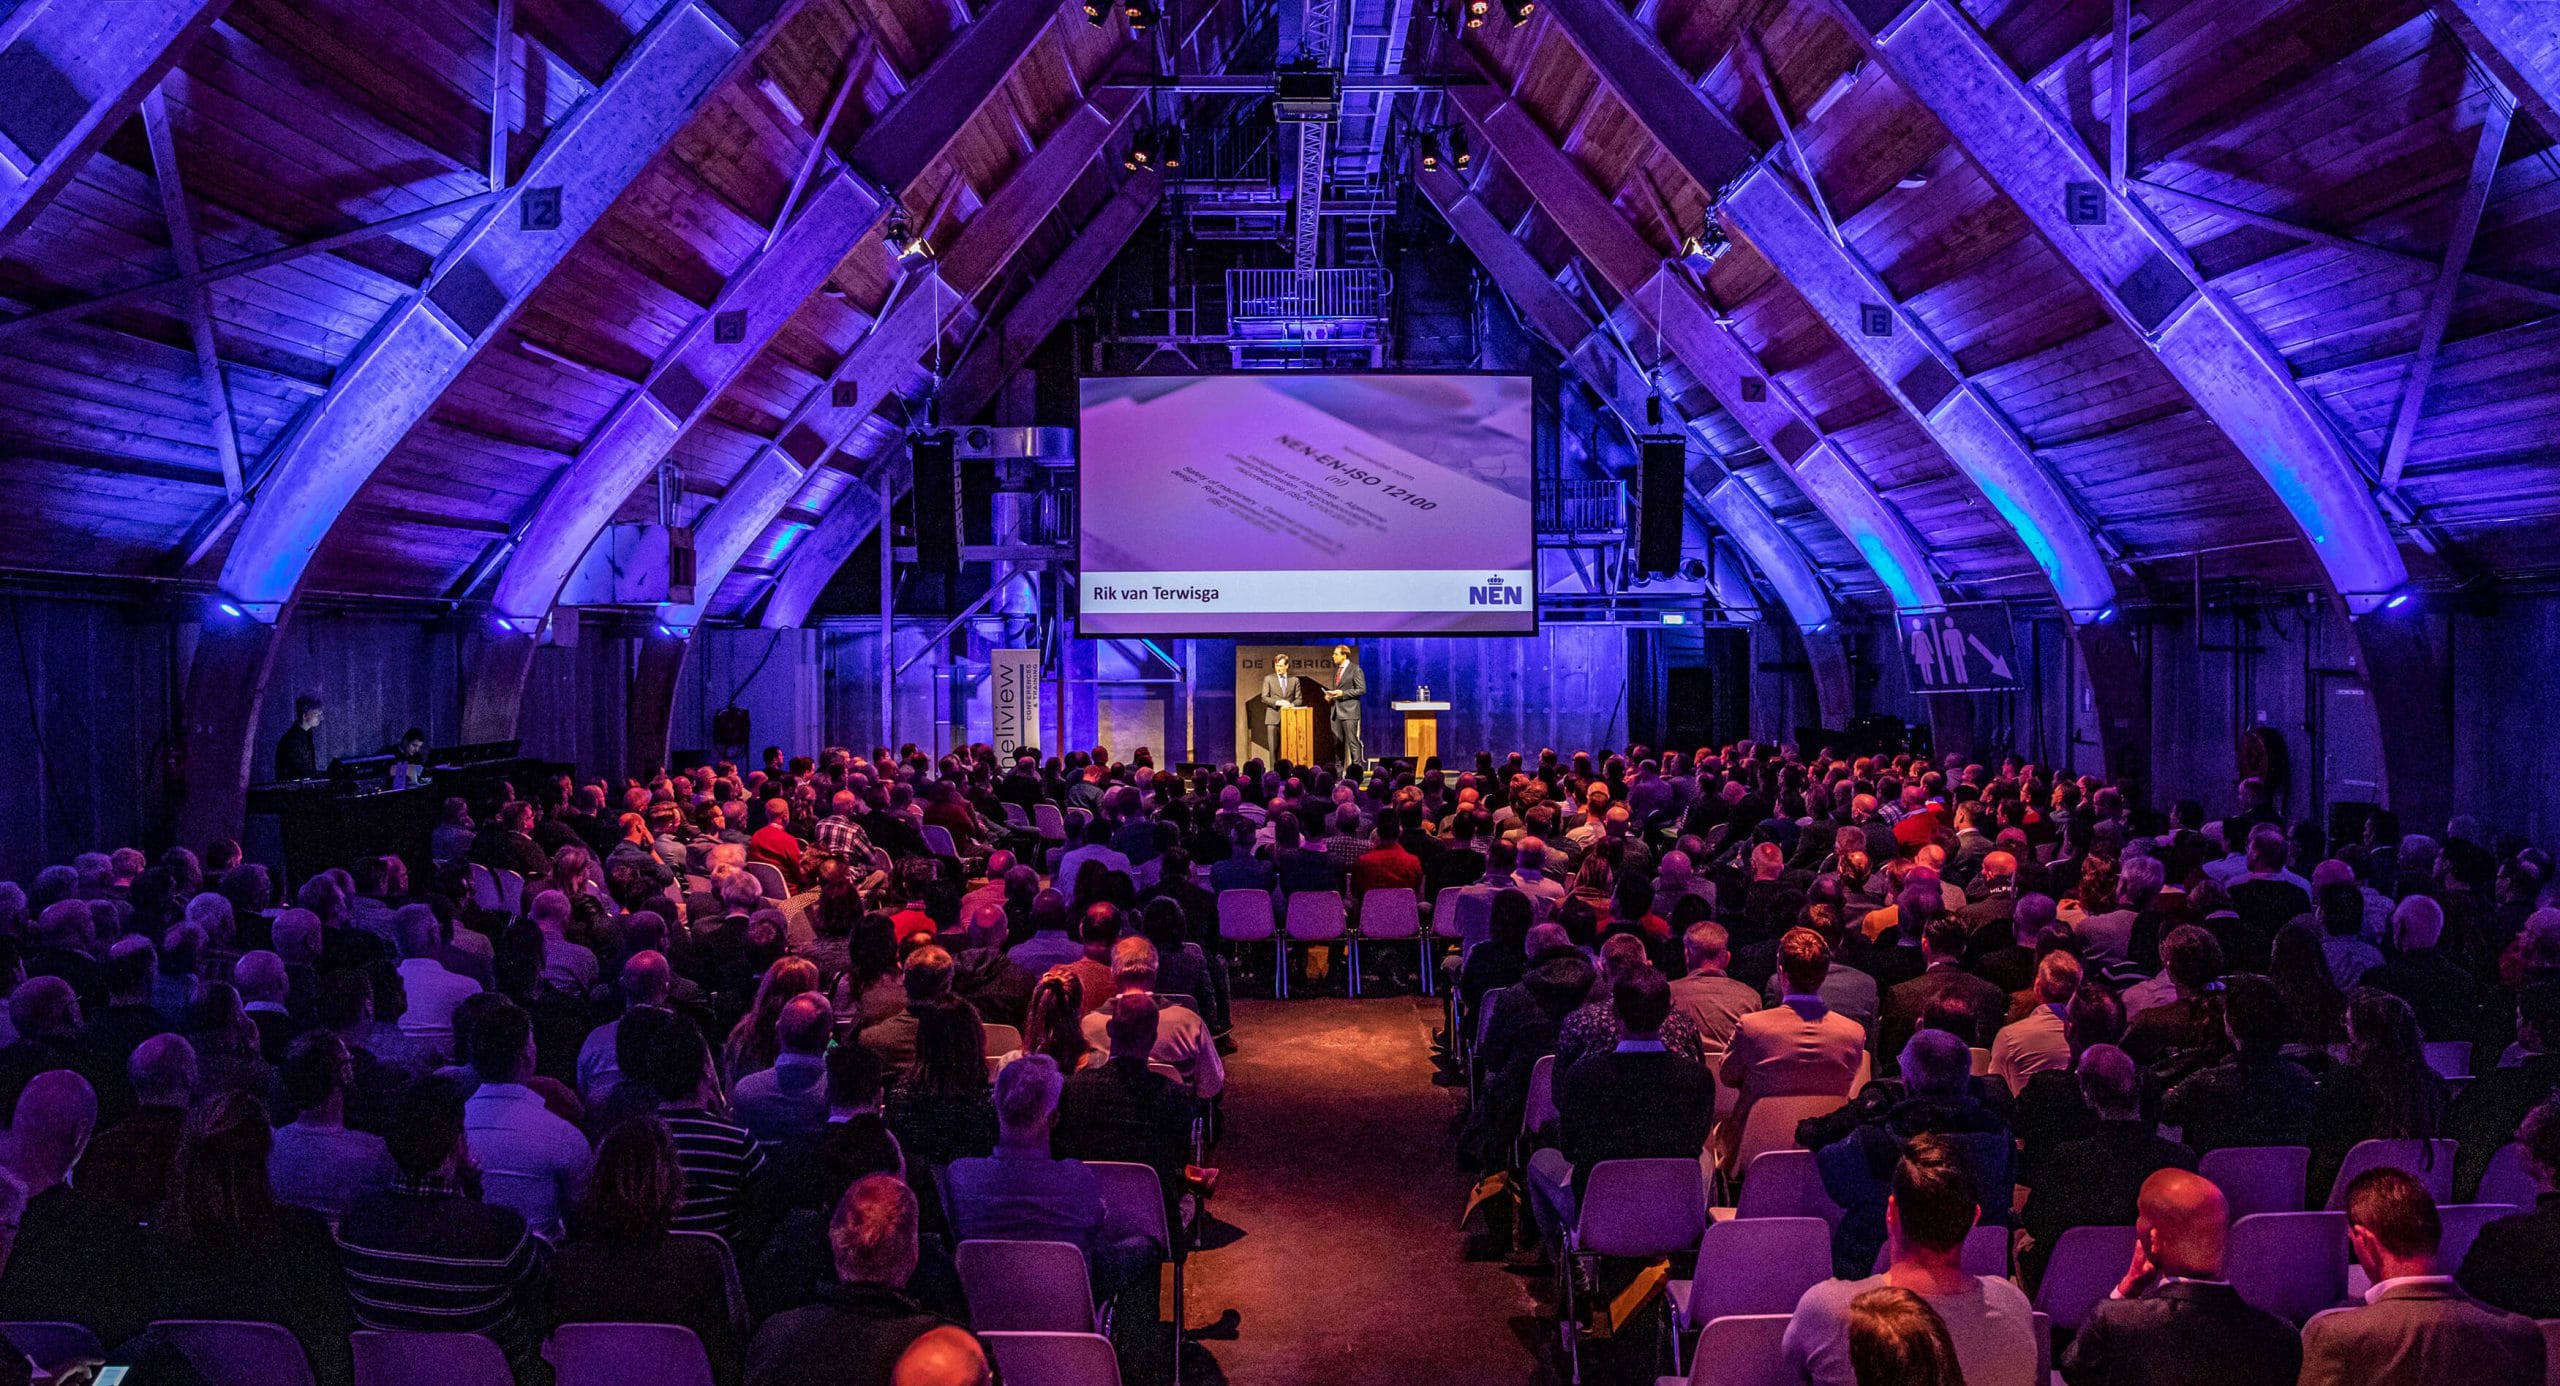 Volle Zaal